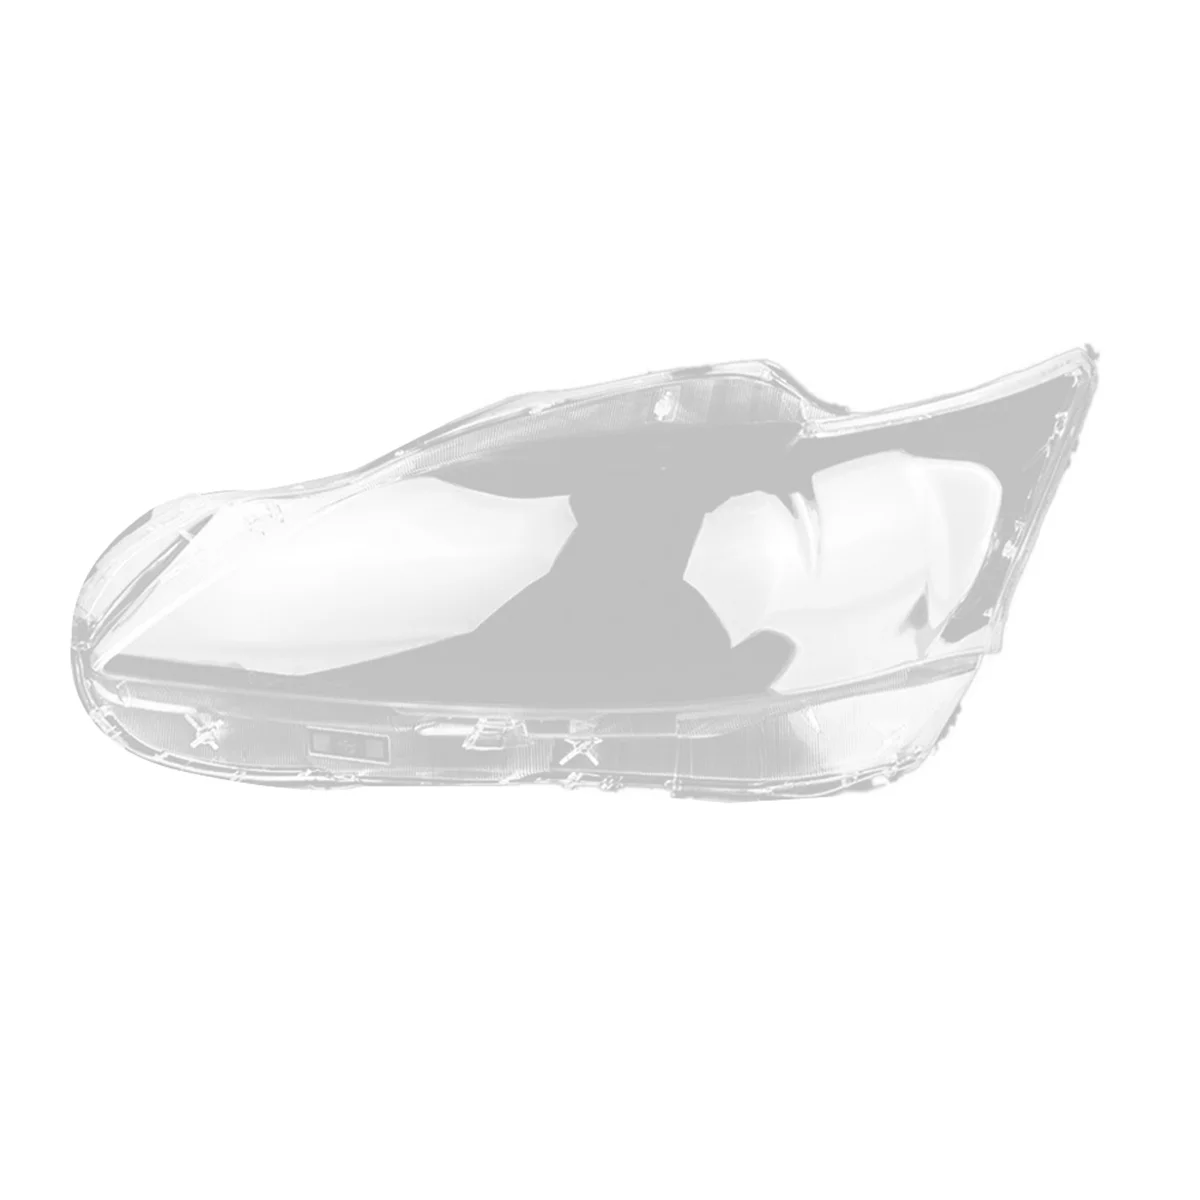 

Left Car Headlight Lens Cover Headlight Shade Shell Auto Shell Cover for Lexus CT200 CT200H 2012-2017